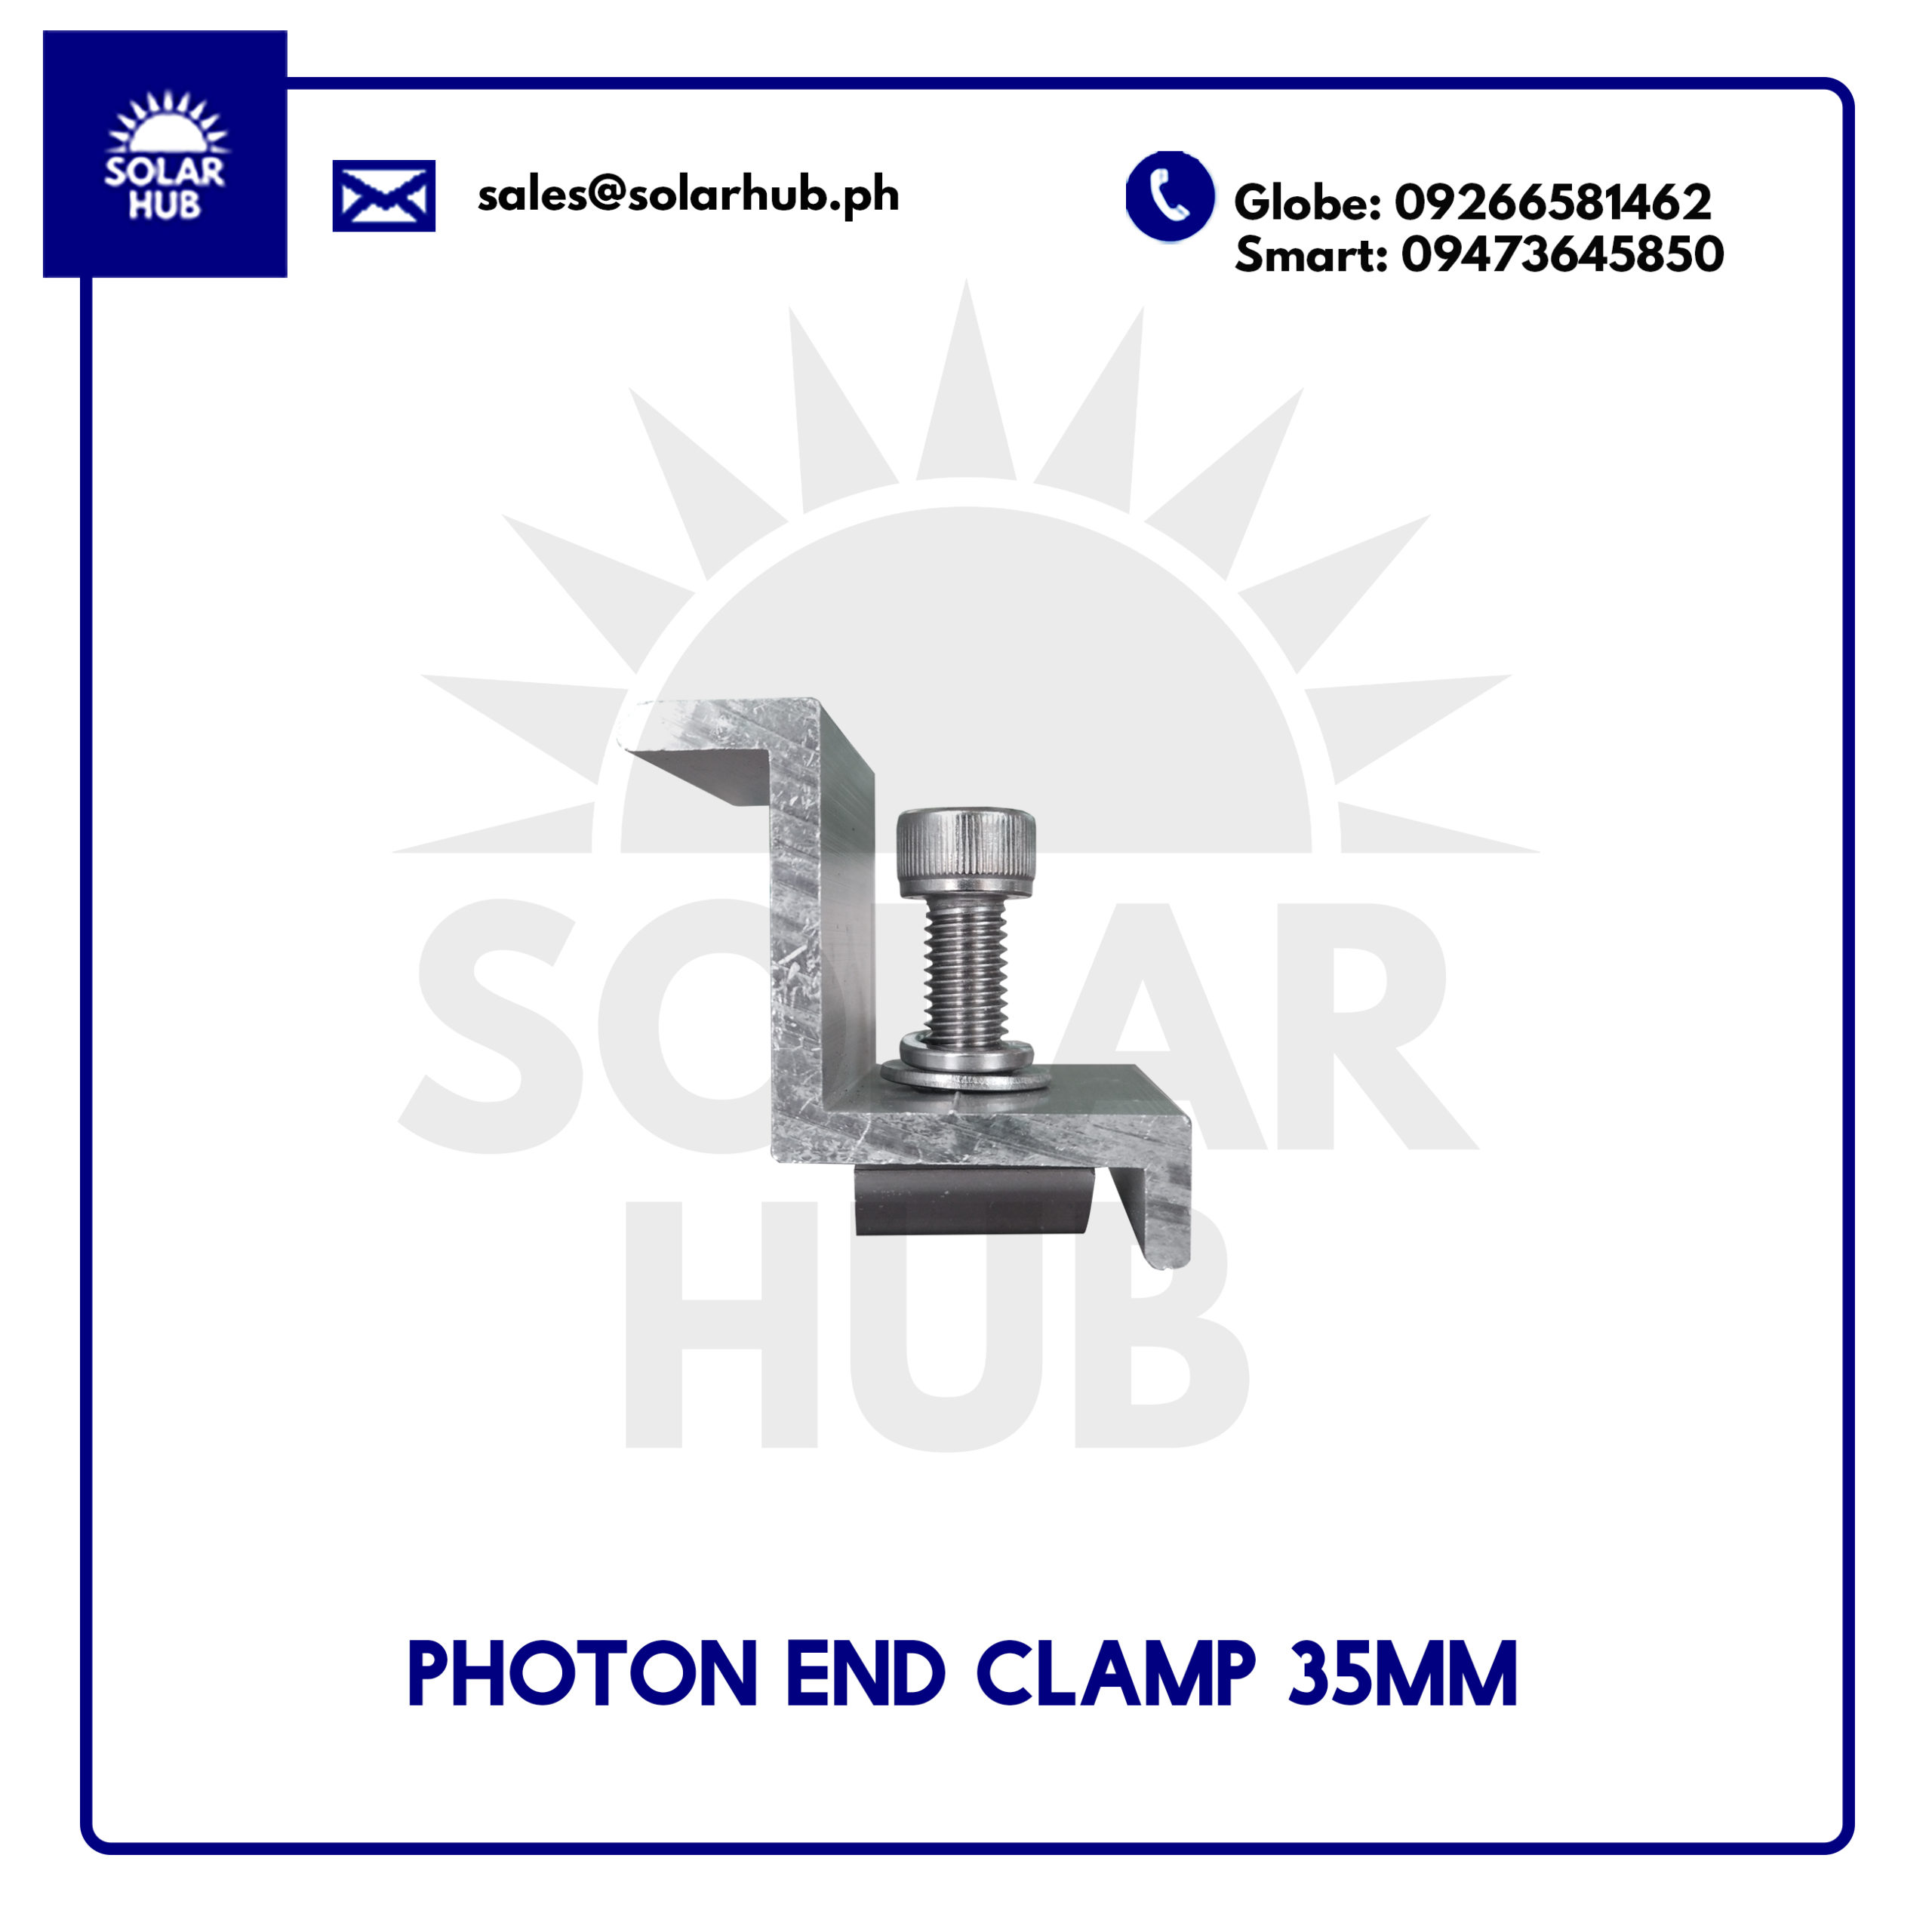 Photon End Clamp 35mm